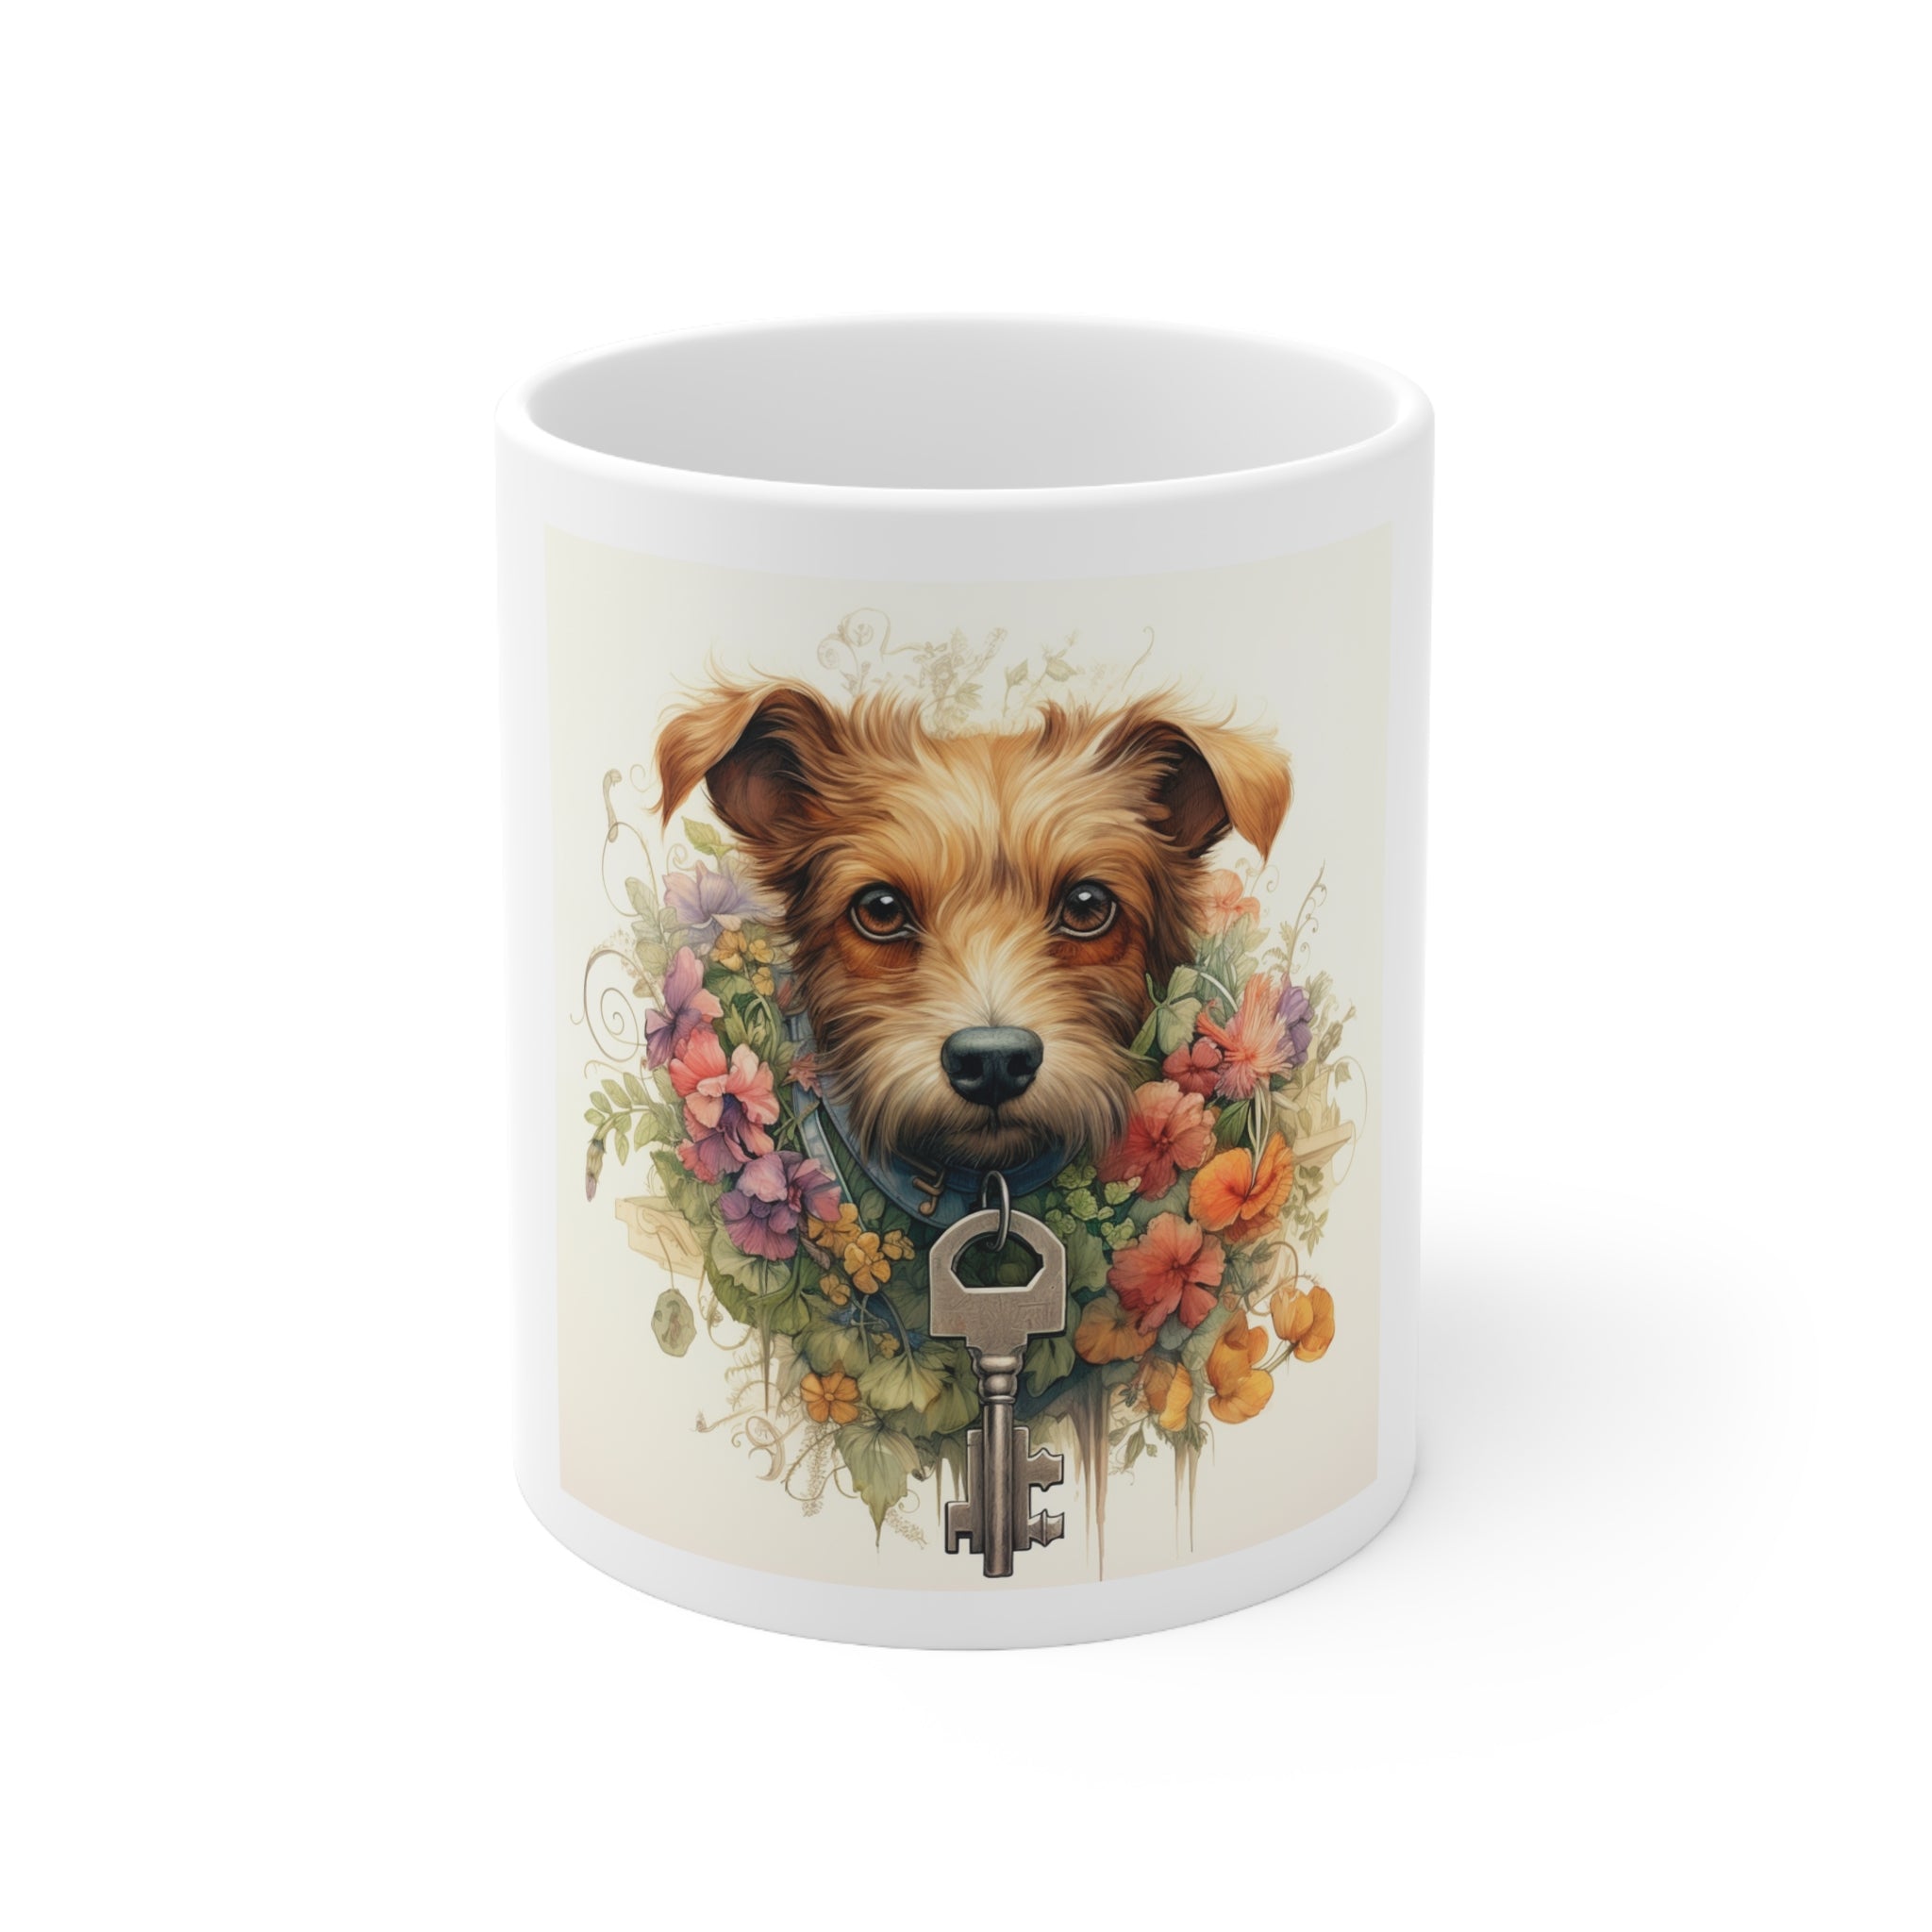 Beautiful Garden Party Animal Illustrations, and Floral accent, Coffee Mug Gifts for "Cawfee" drinkers and Starbucks Lovers